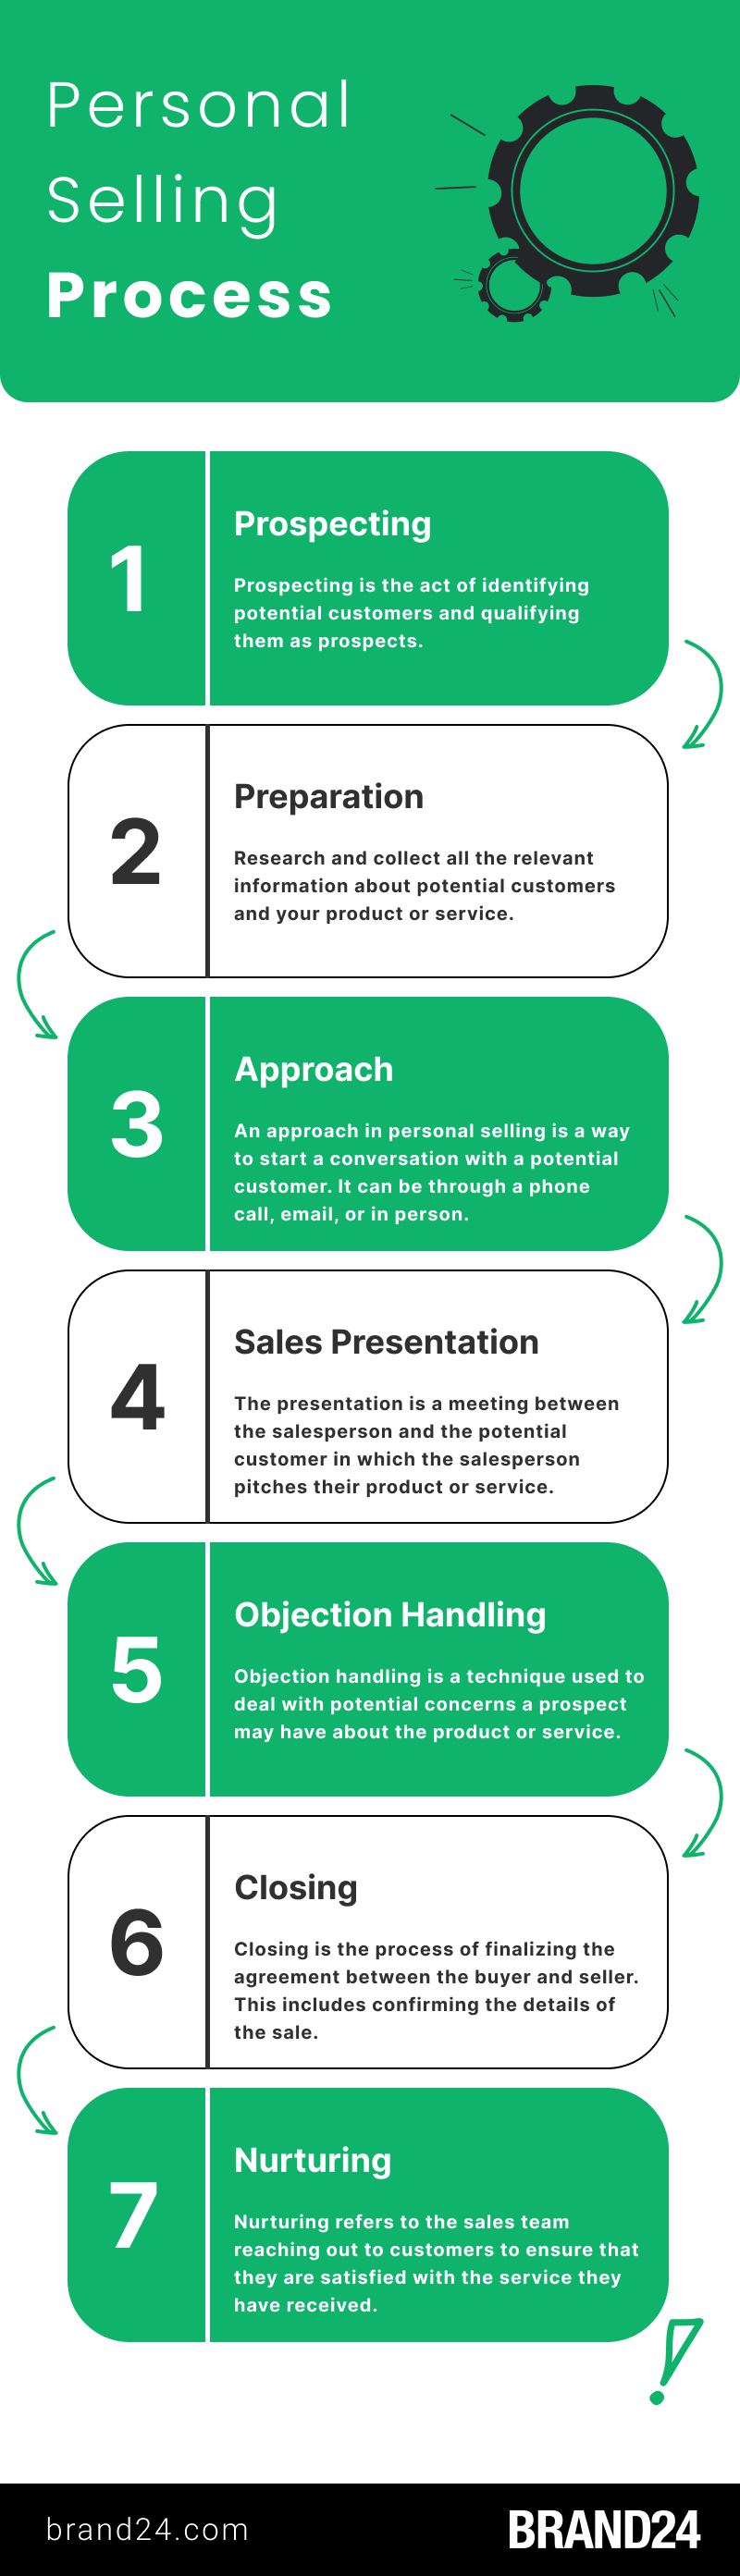 7-steps of the Personal Selling Process